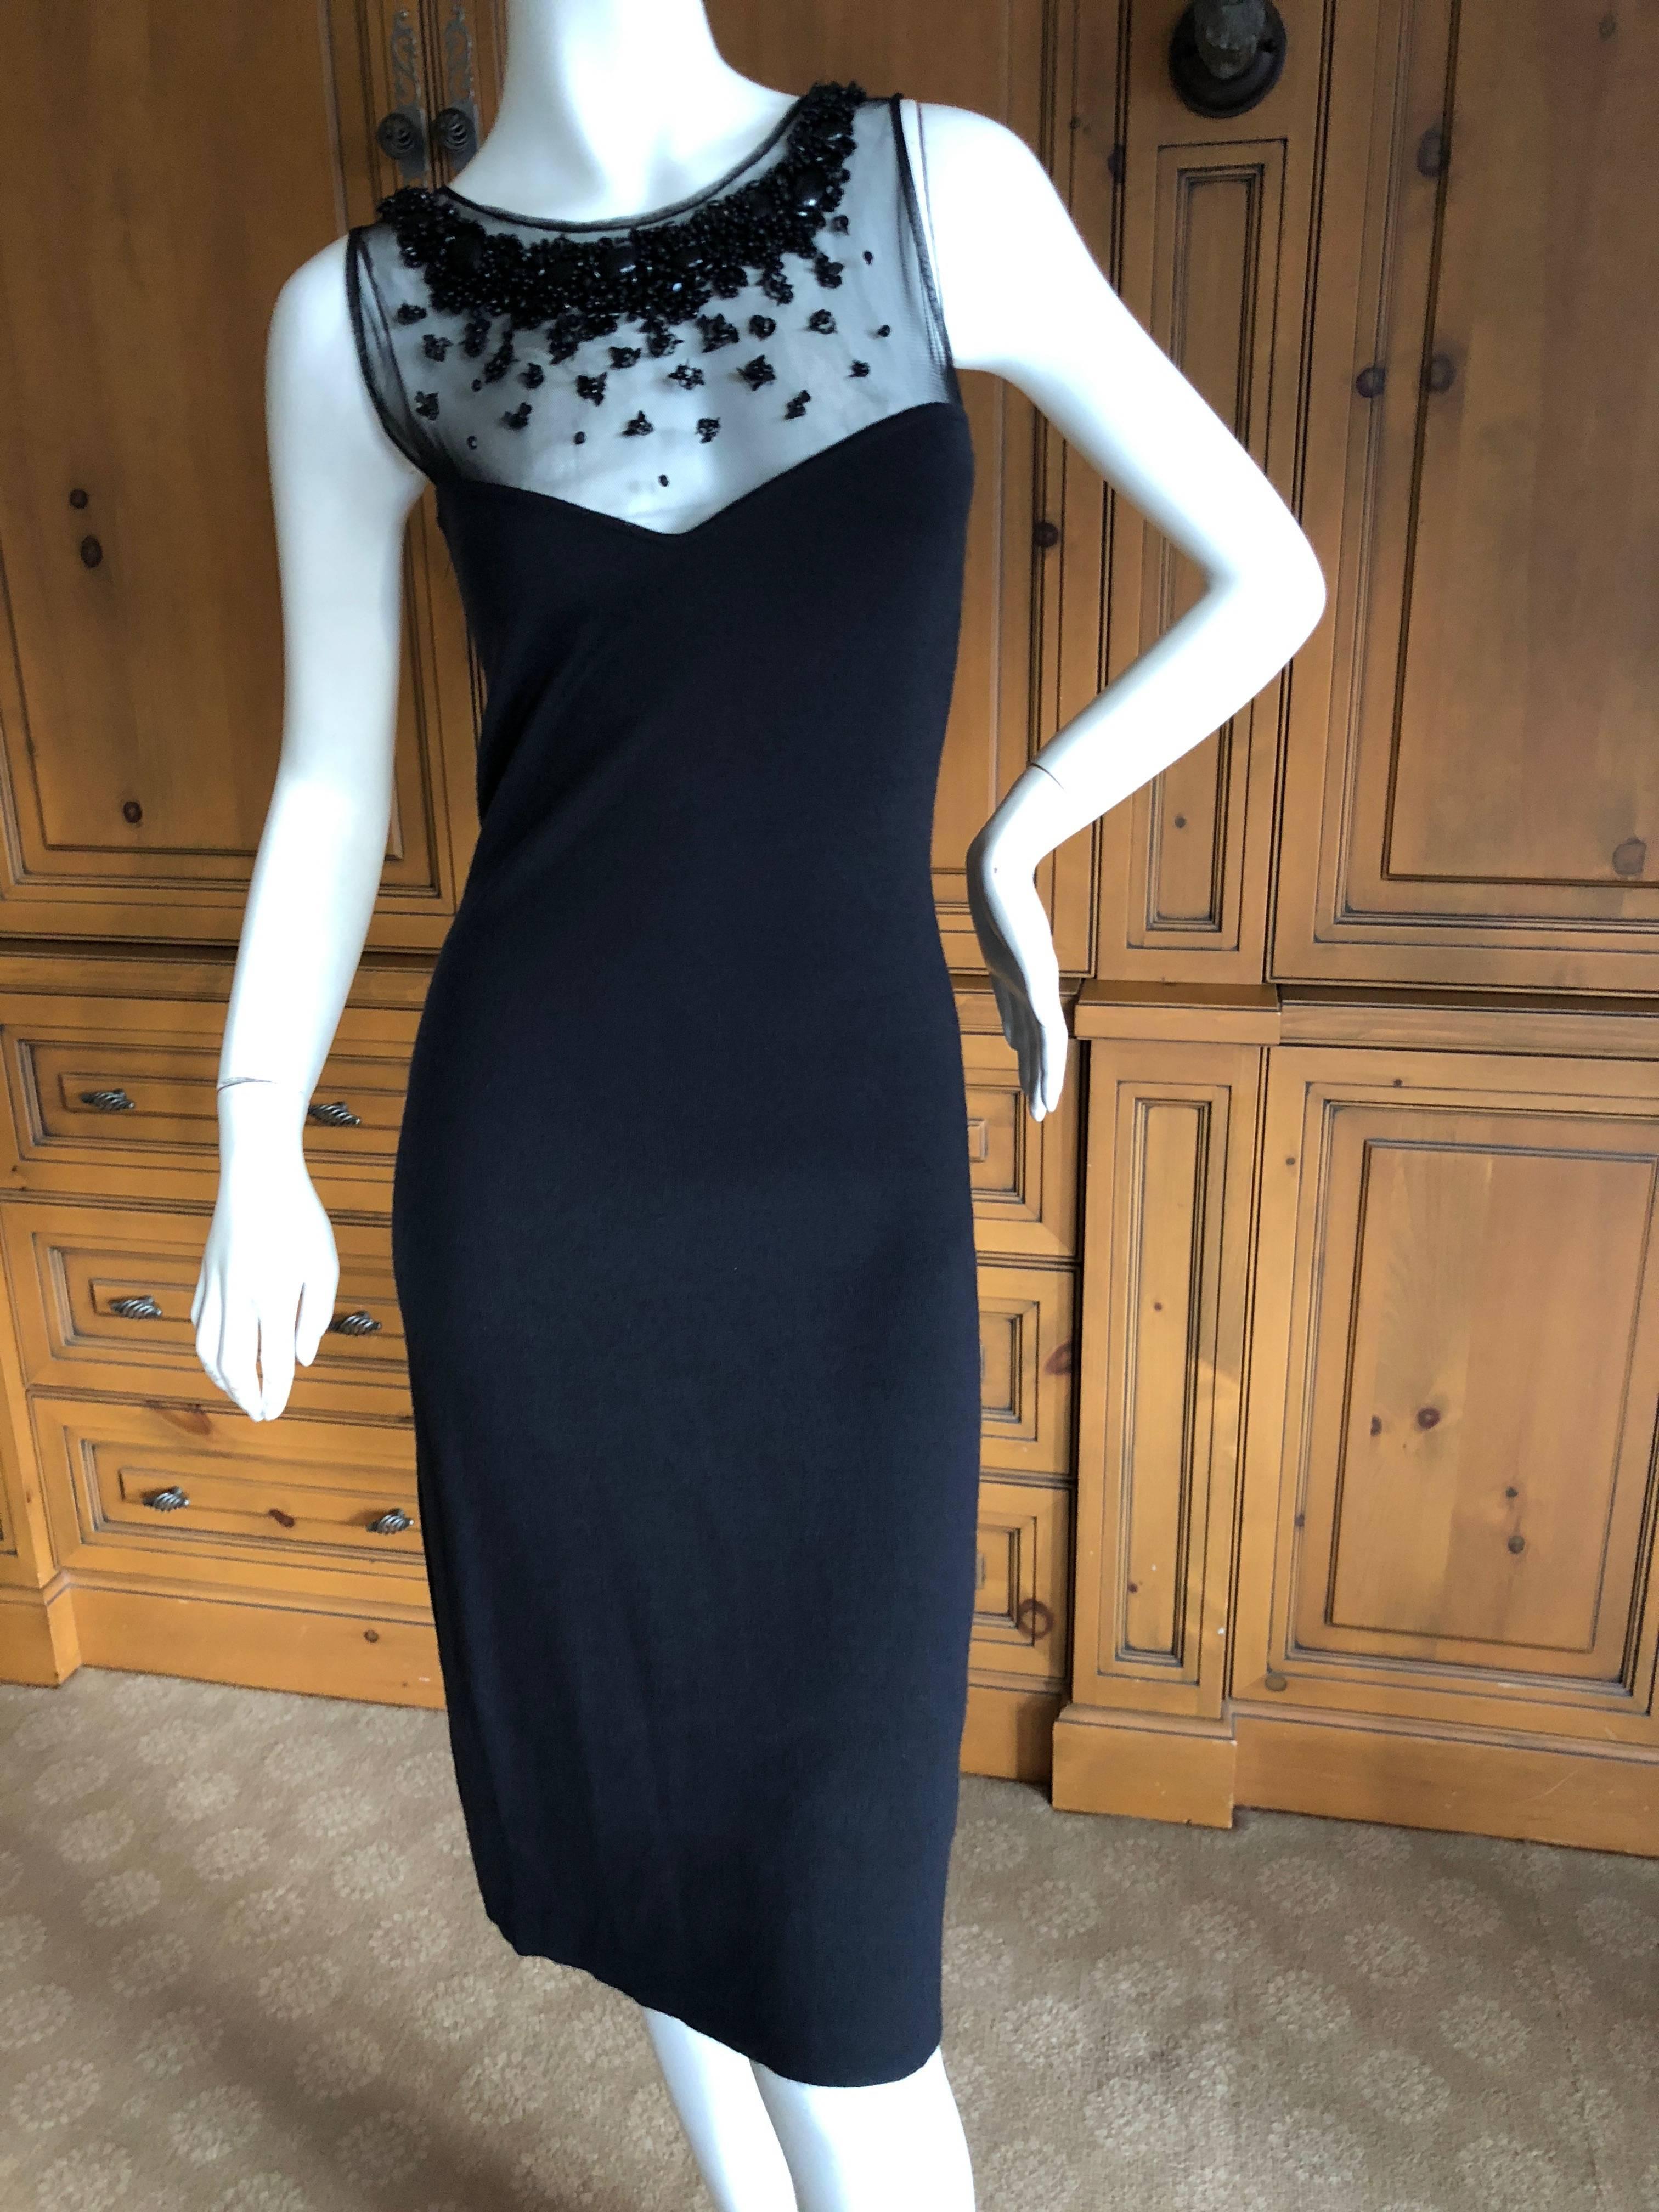 Simply amazing cashmere shift dress with jewels sewn on to a net overlay by Lesage.
 This is so much prettier in person, it really sparkles a lot.
I believe this is by John Galliano for Dior, but it could be Ferre. 

There is a lot of stretch, no